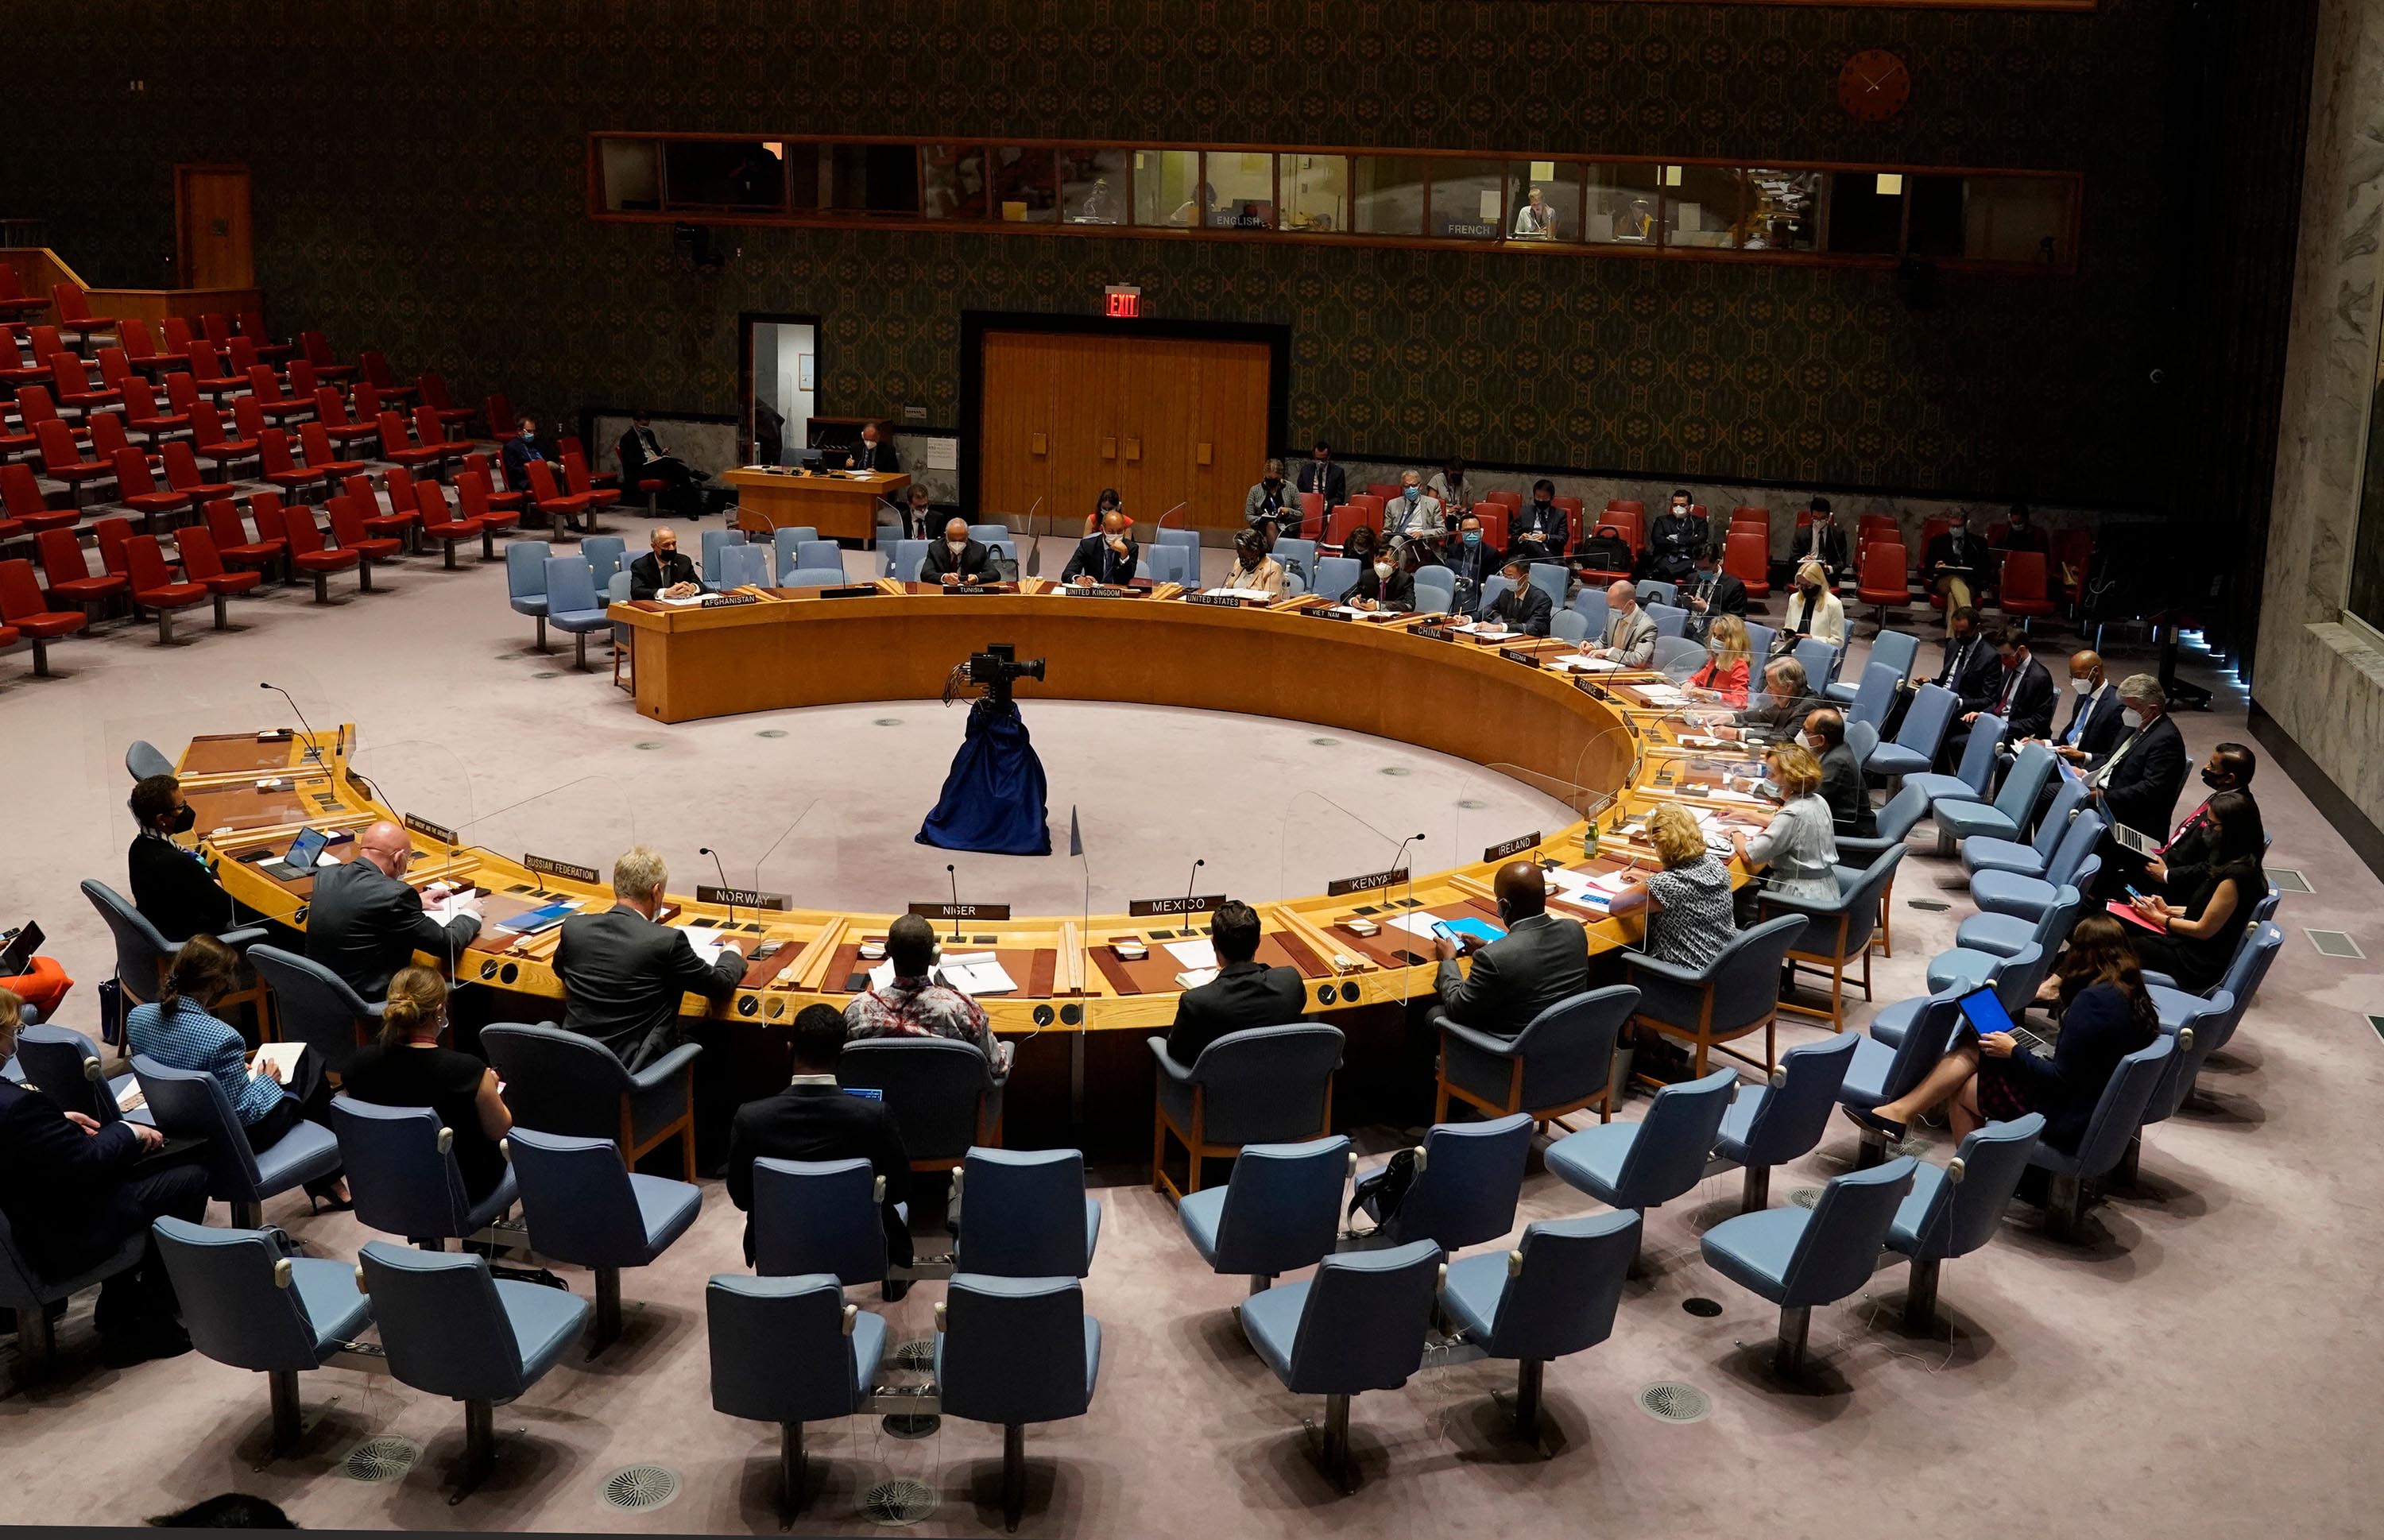 United Nations Secretary General António Guterres and others gather for a UN Security Council meeting on Afghanistan on August 16, 2021 at the United Nations in New York.